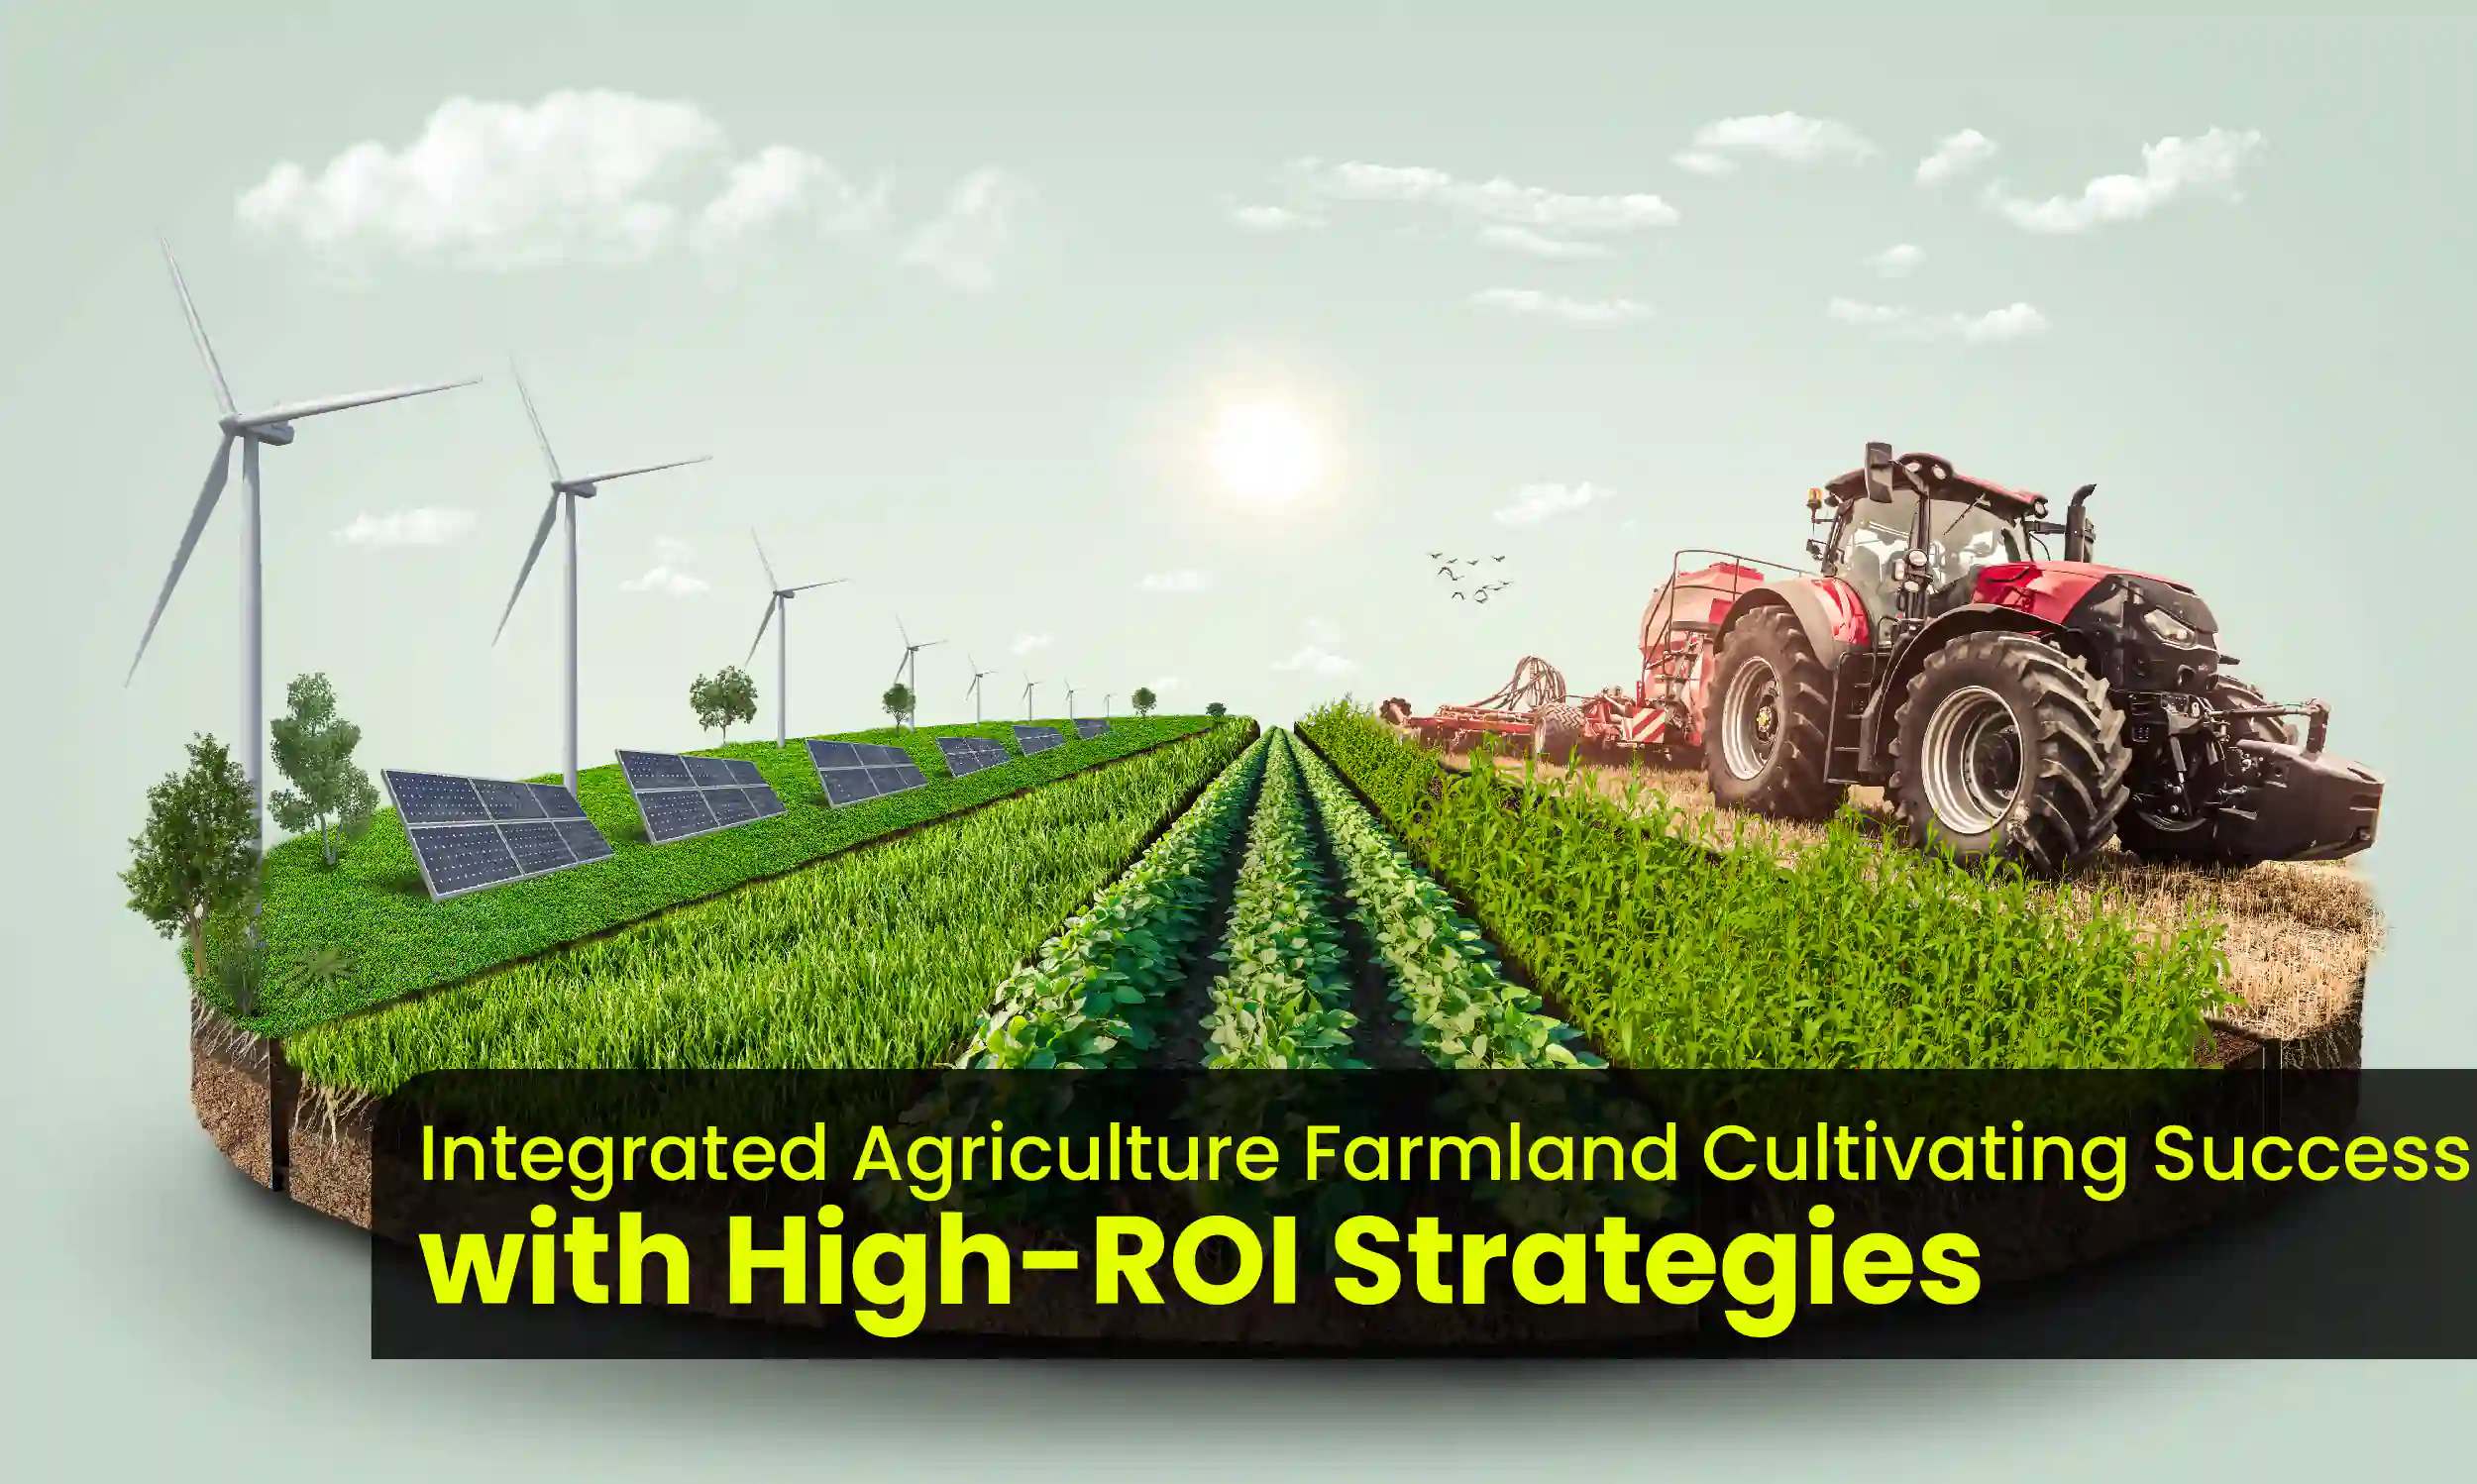 Integrated Agriculture Farmland Cultivating Success with High-ROI Strategies